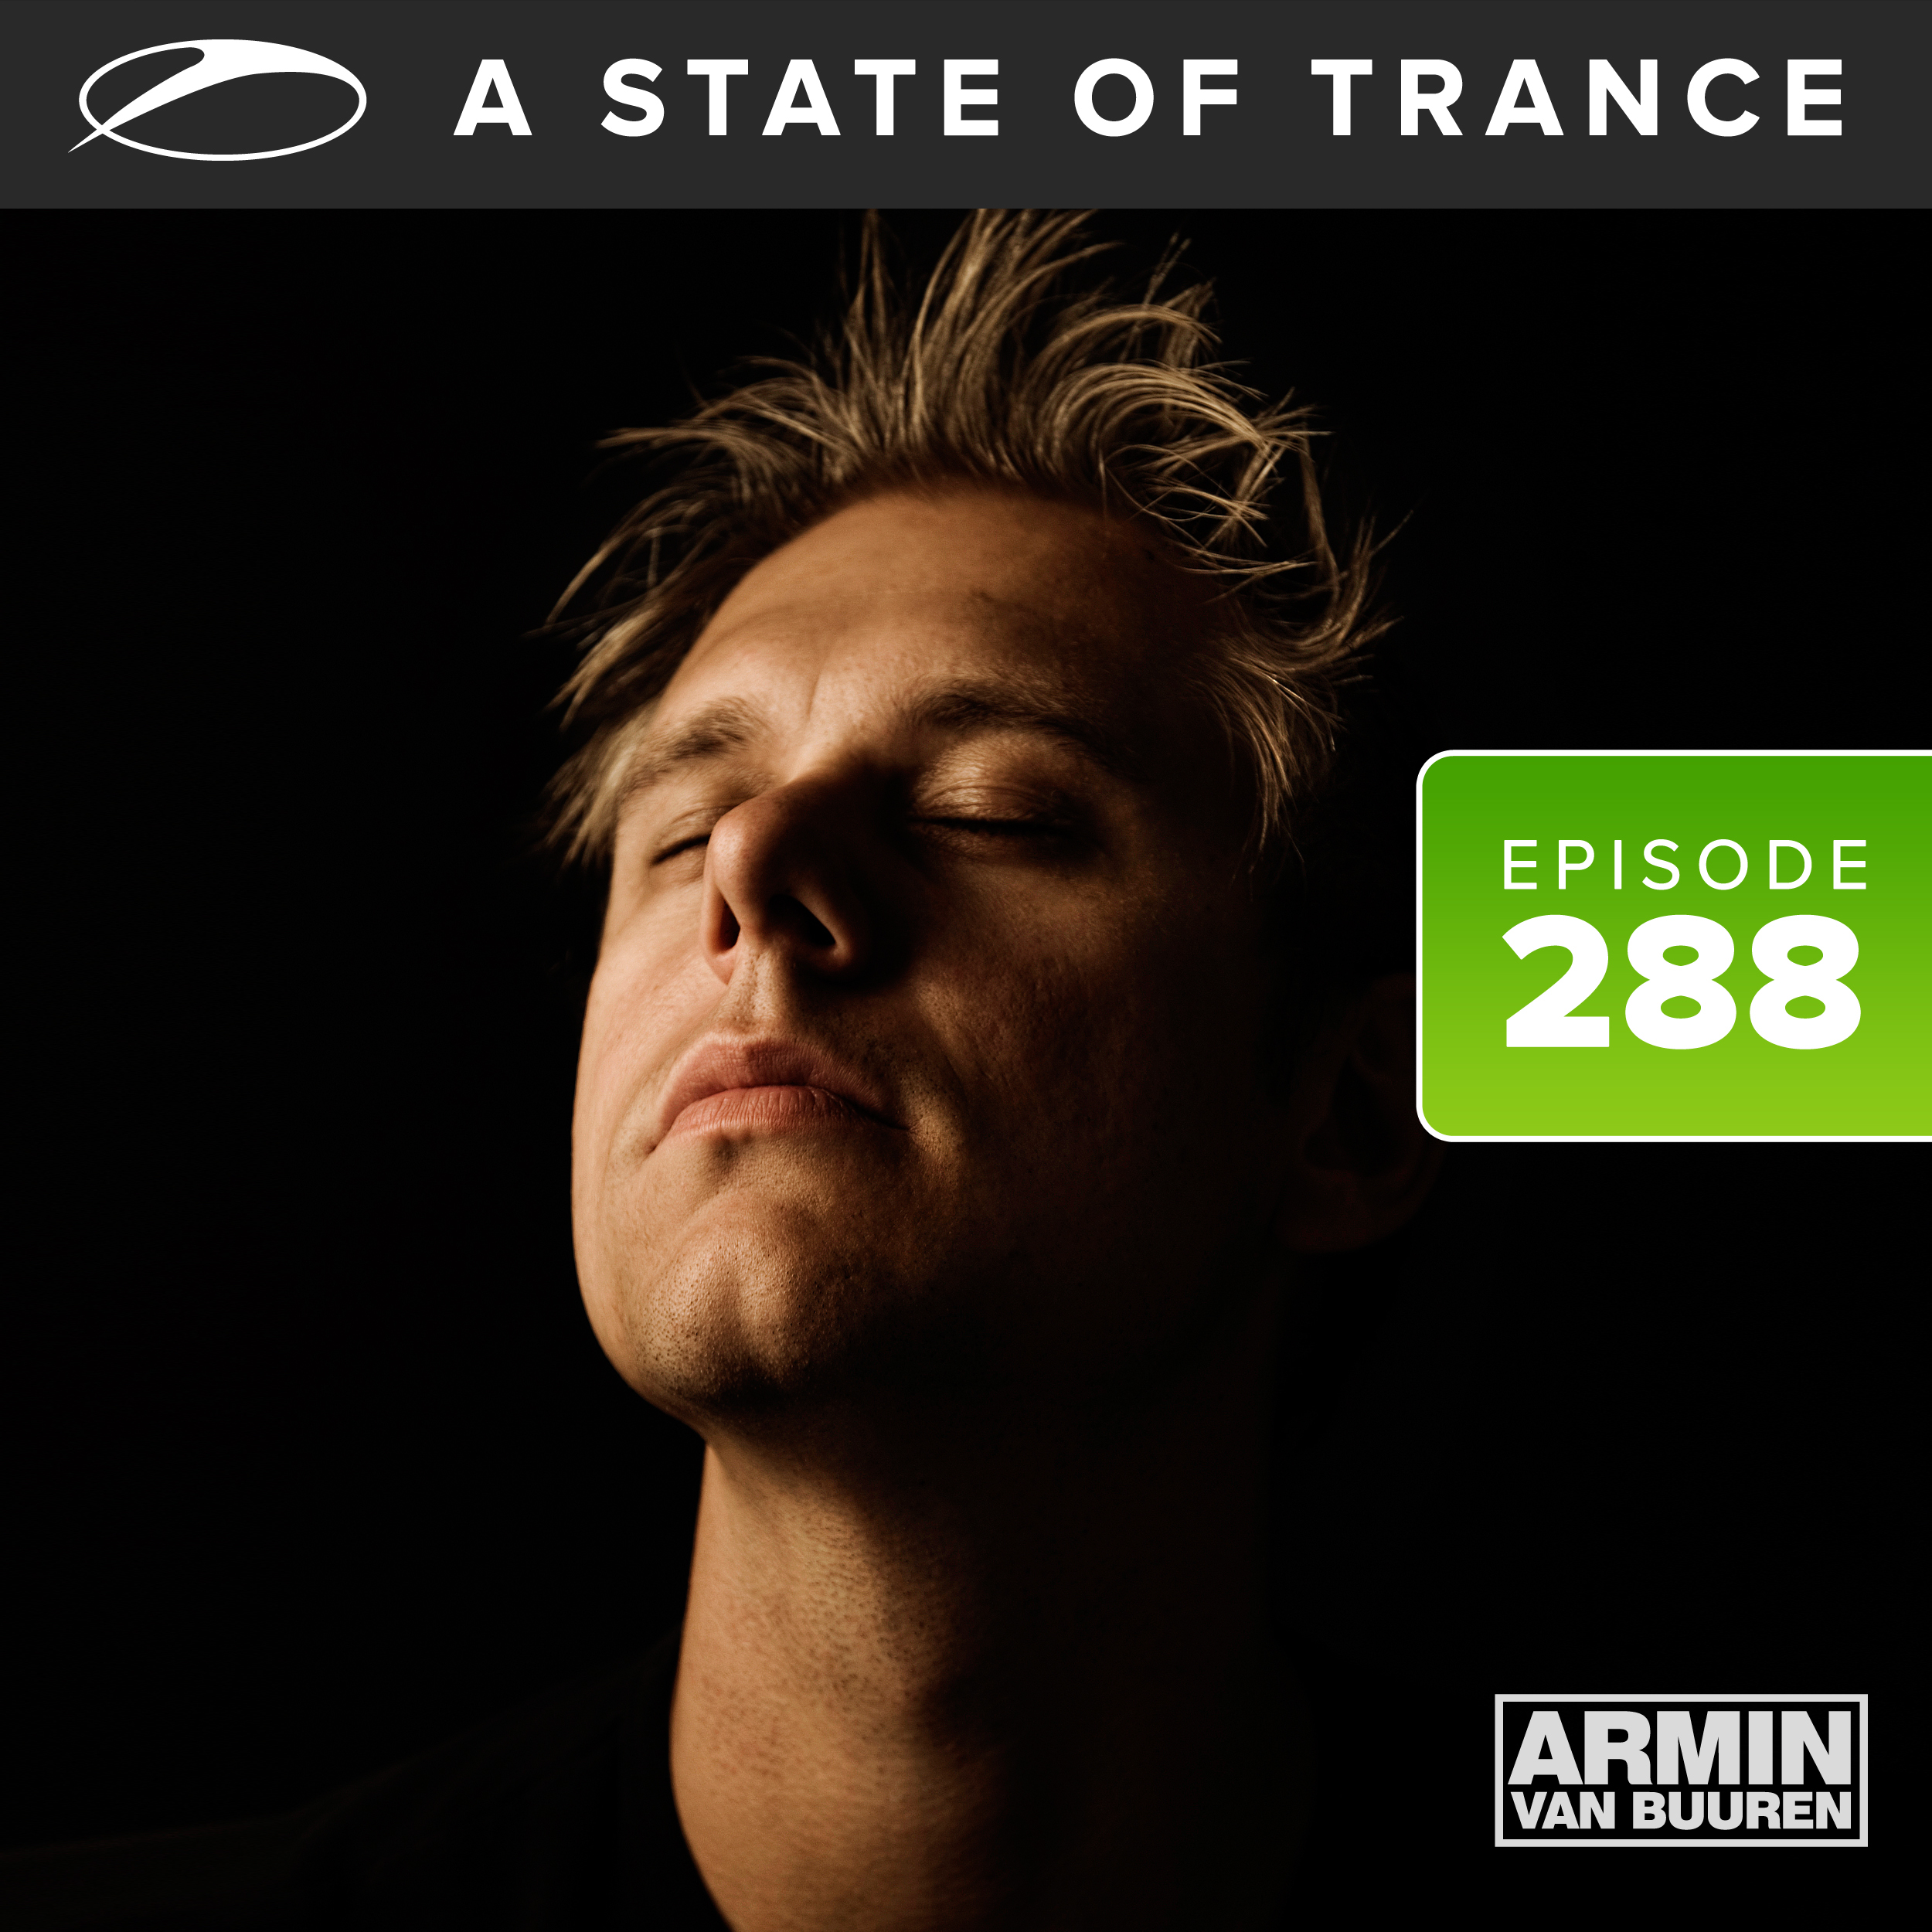 A State Of Trance Episode 288